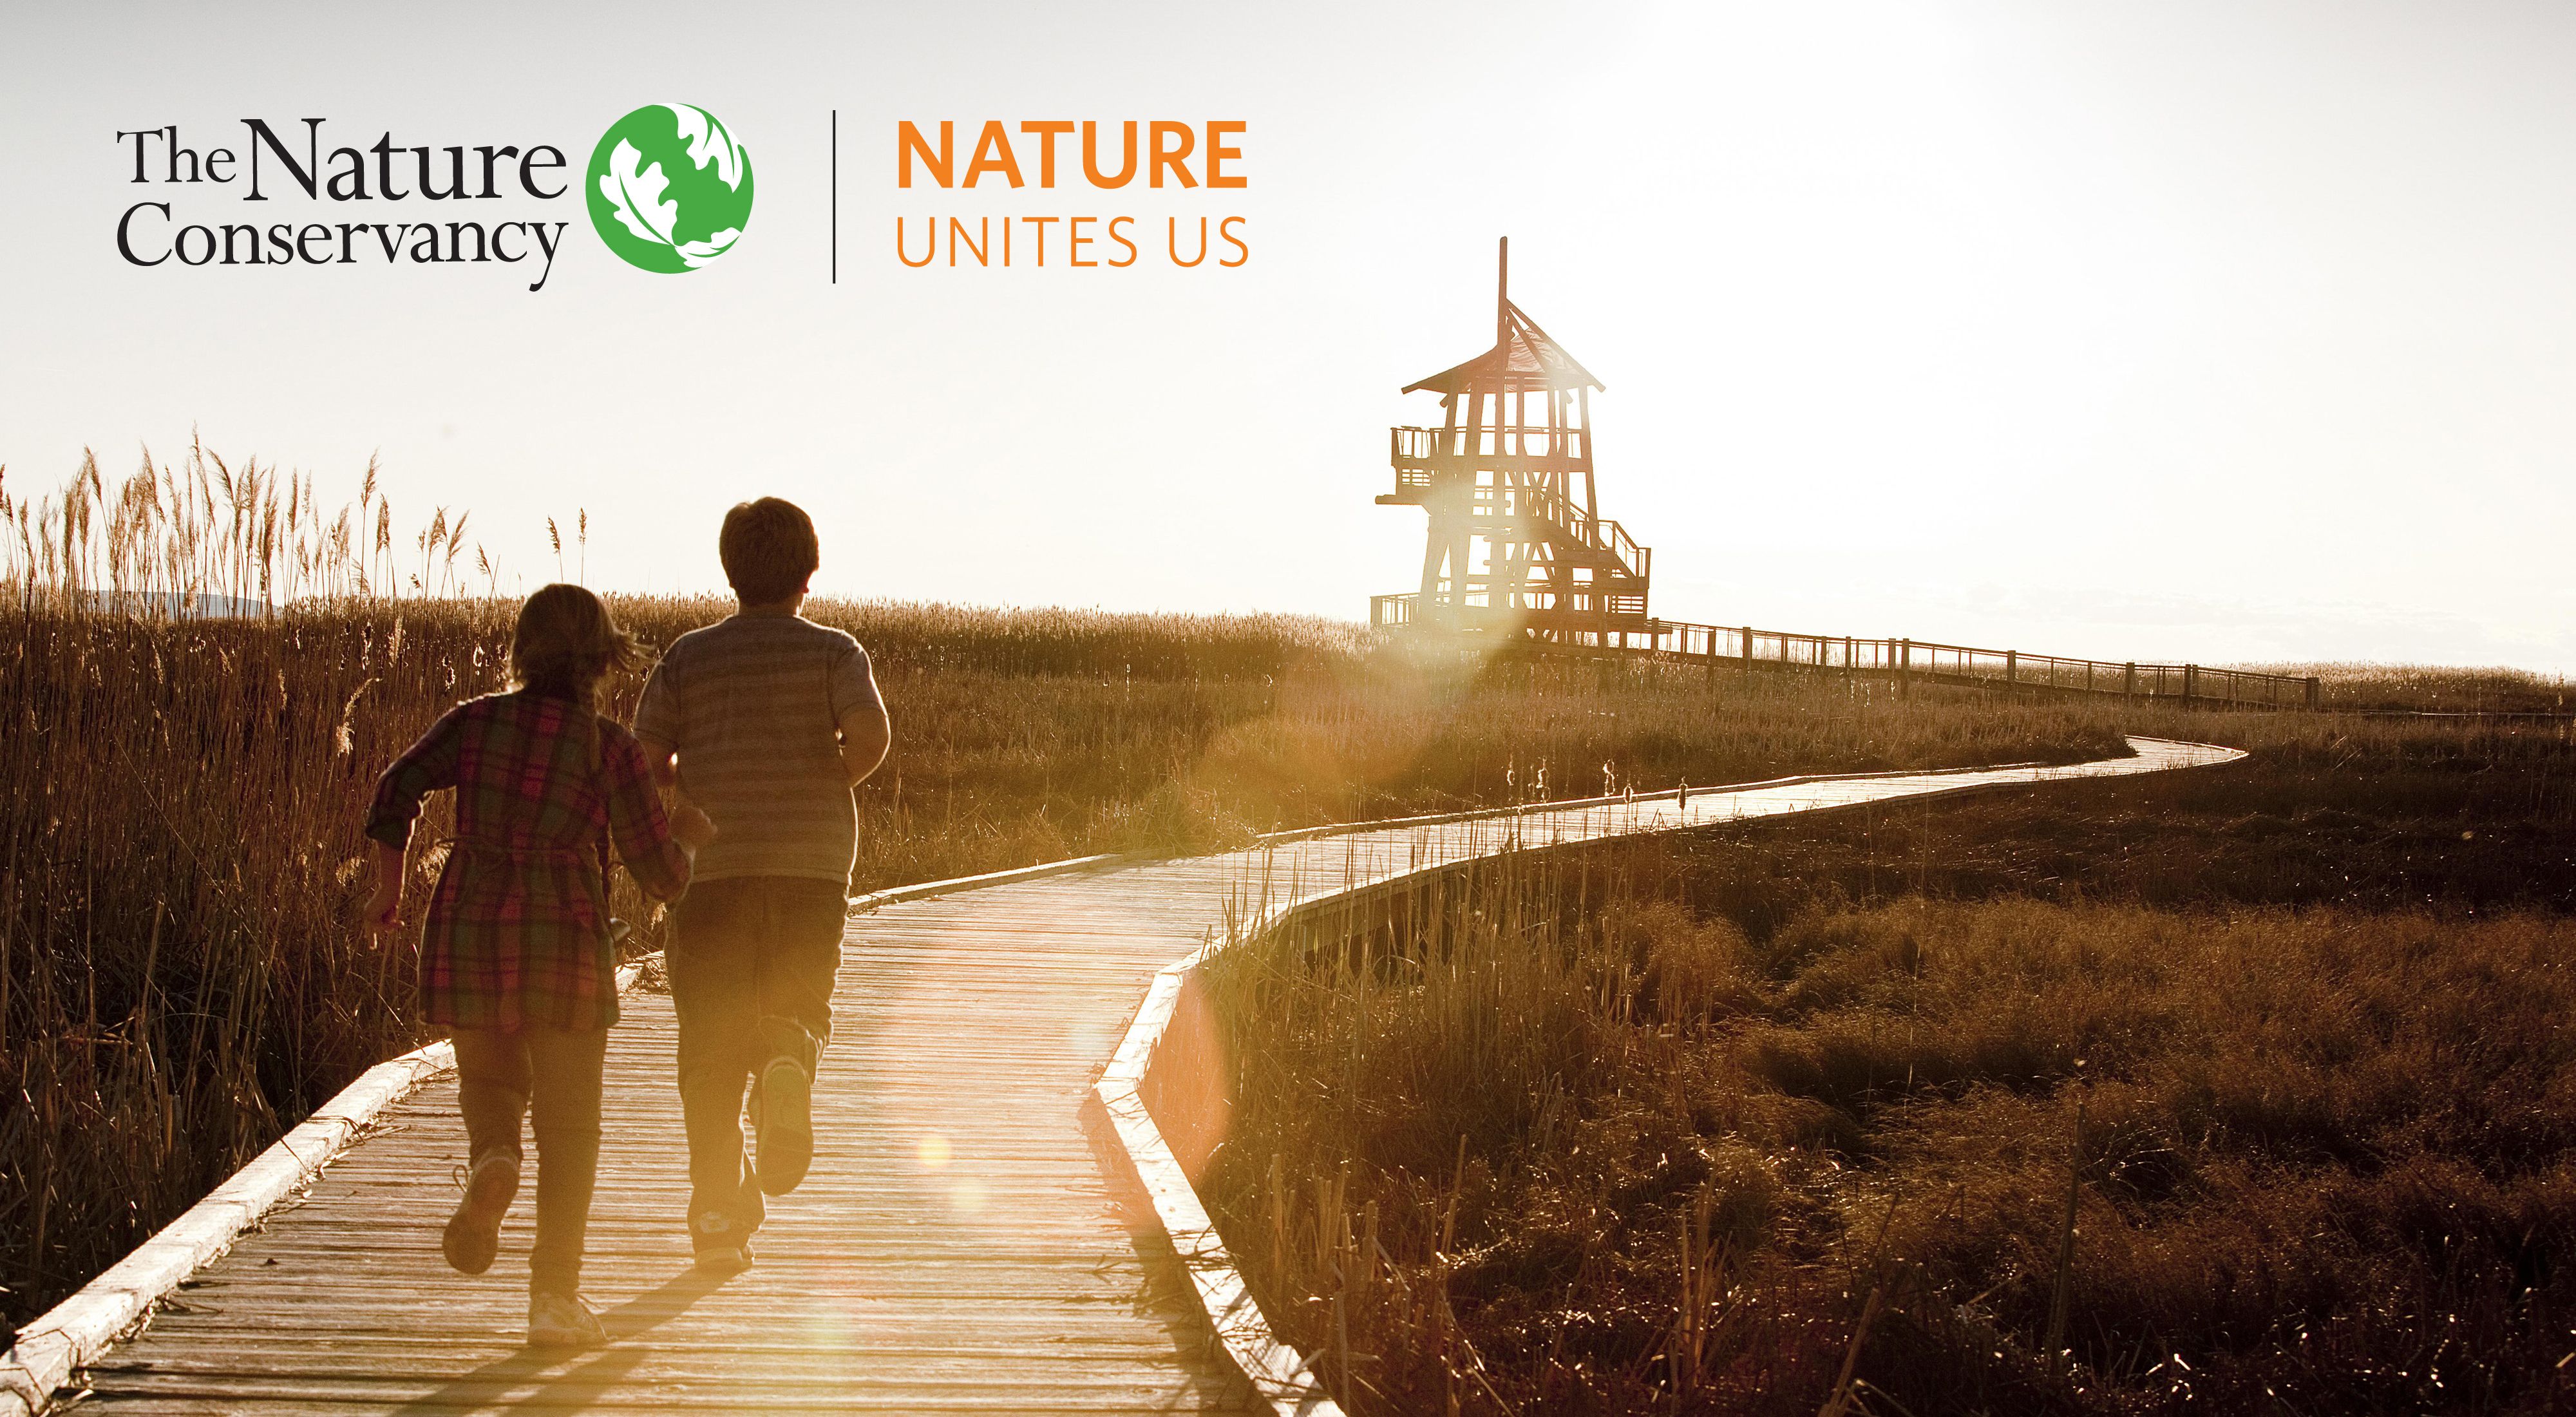 Places We Protect  The Nature Conservancy